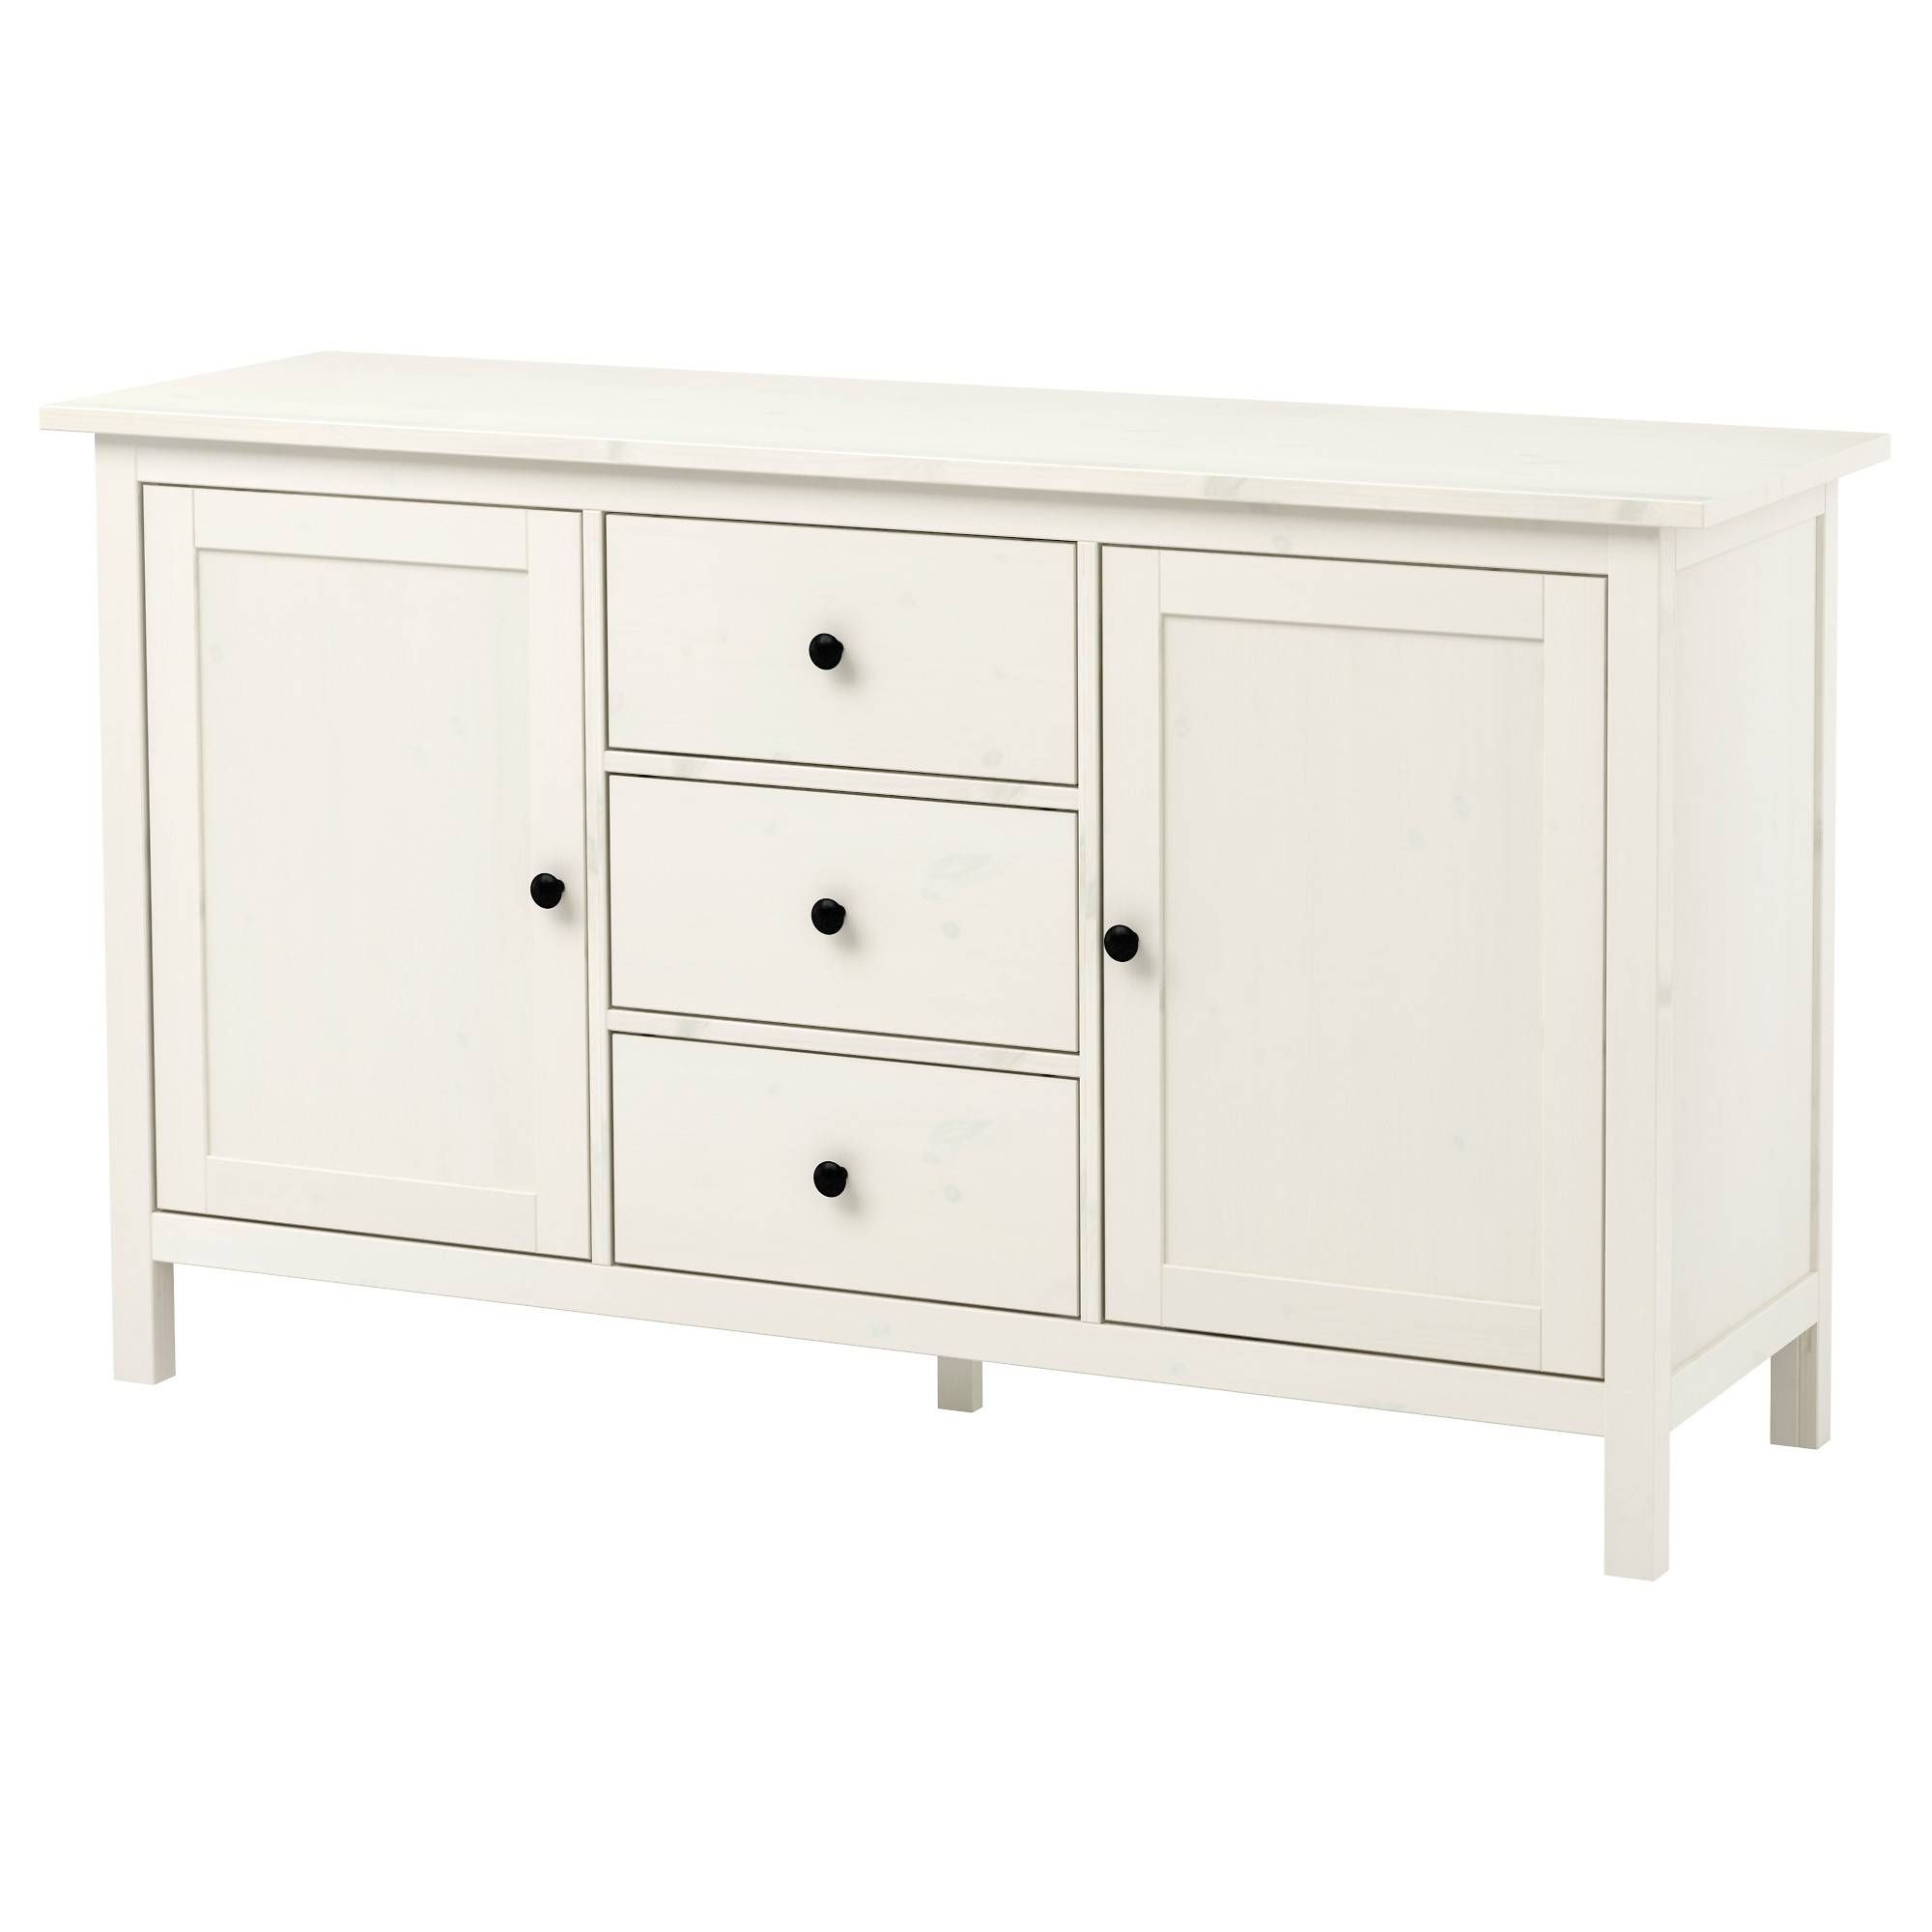 Hemnes Sideboard – White Stain – Ikea Within Latest Ikea Sideboards (View 4 of 15)